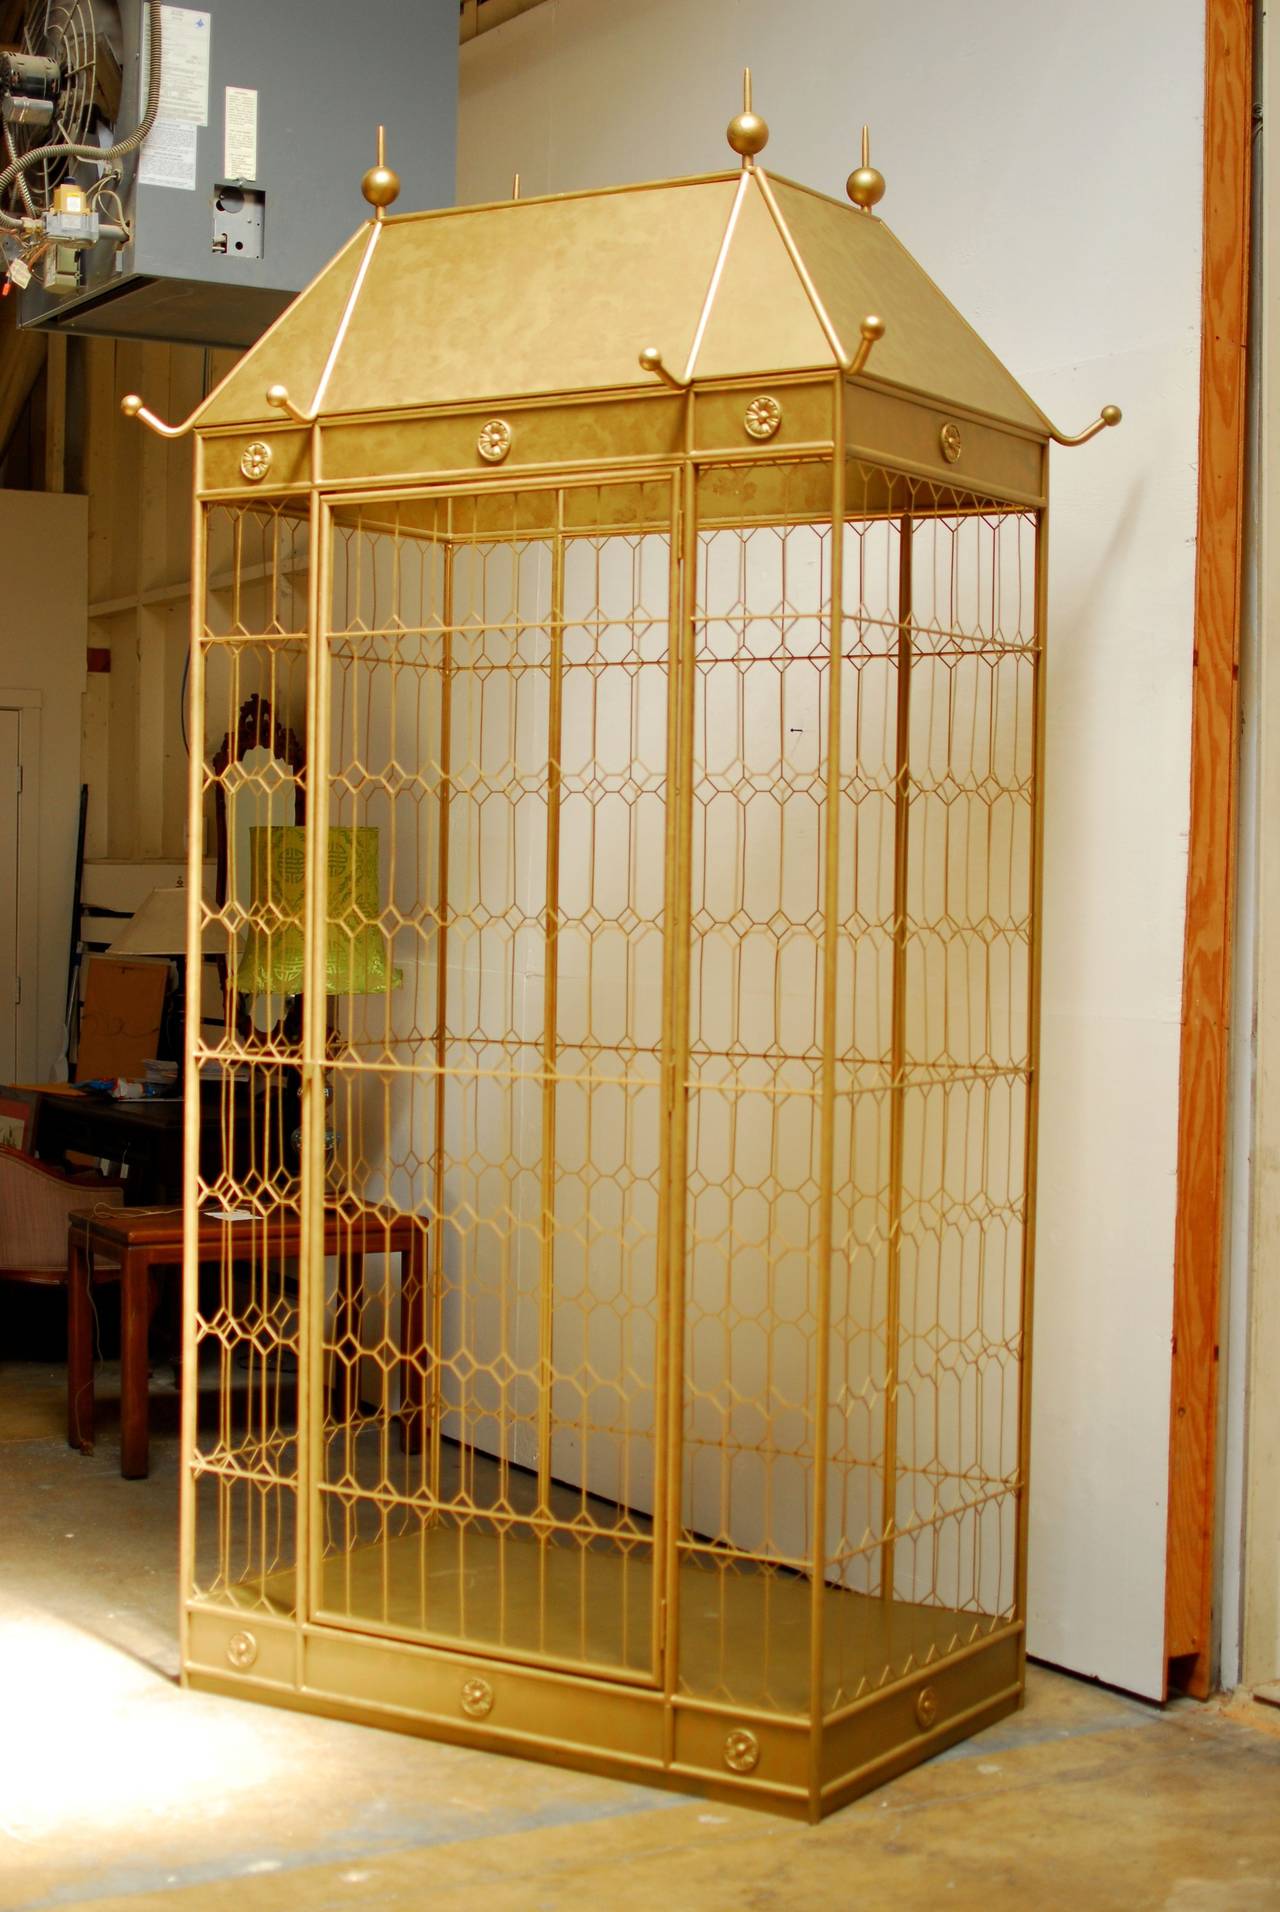 A monumental, Hollywood Regency, gilt metal birdcage standing nearly 10 feet tall. It is artisan handmade entirely of metal and finished with a hand applied matte gilt faux detail. The cage is enclosed by a diamond pattern fretwork and has a large